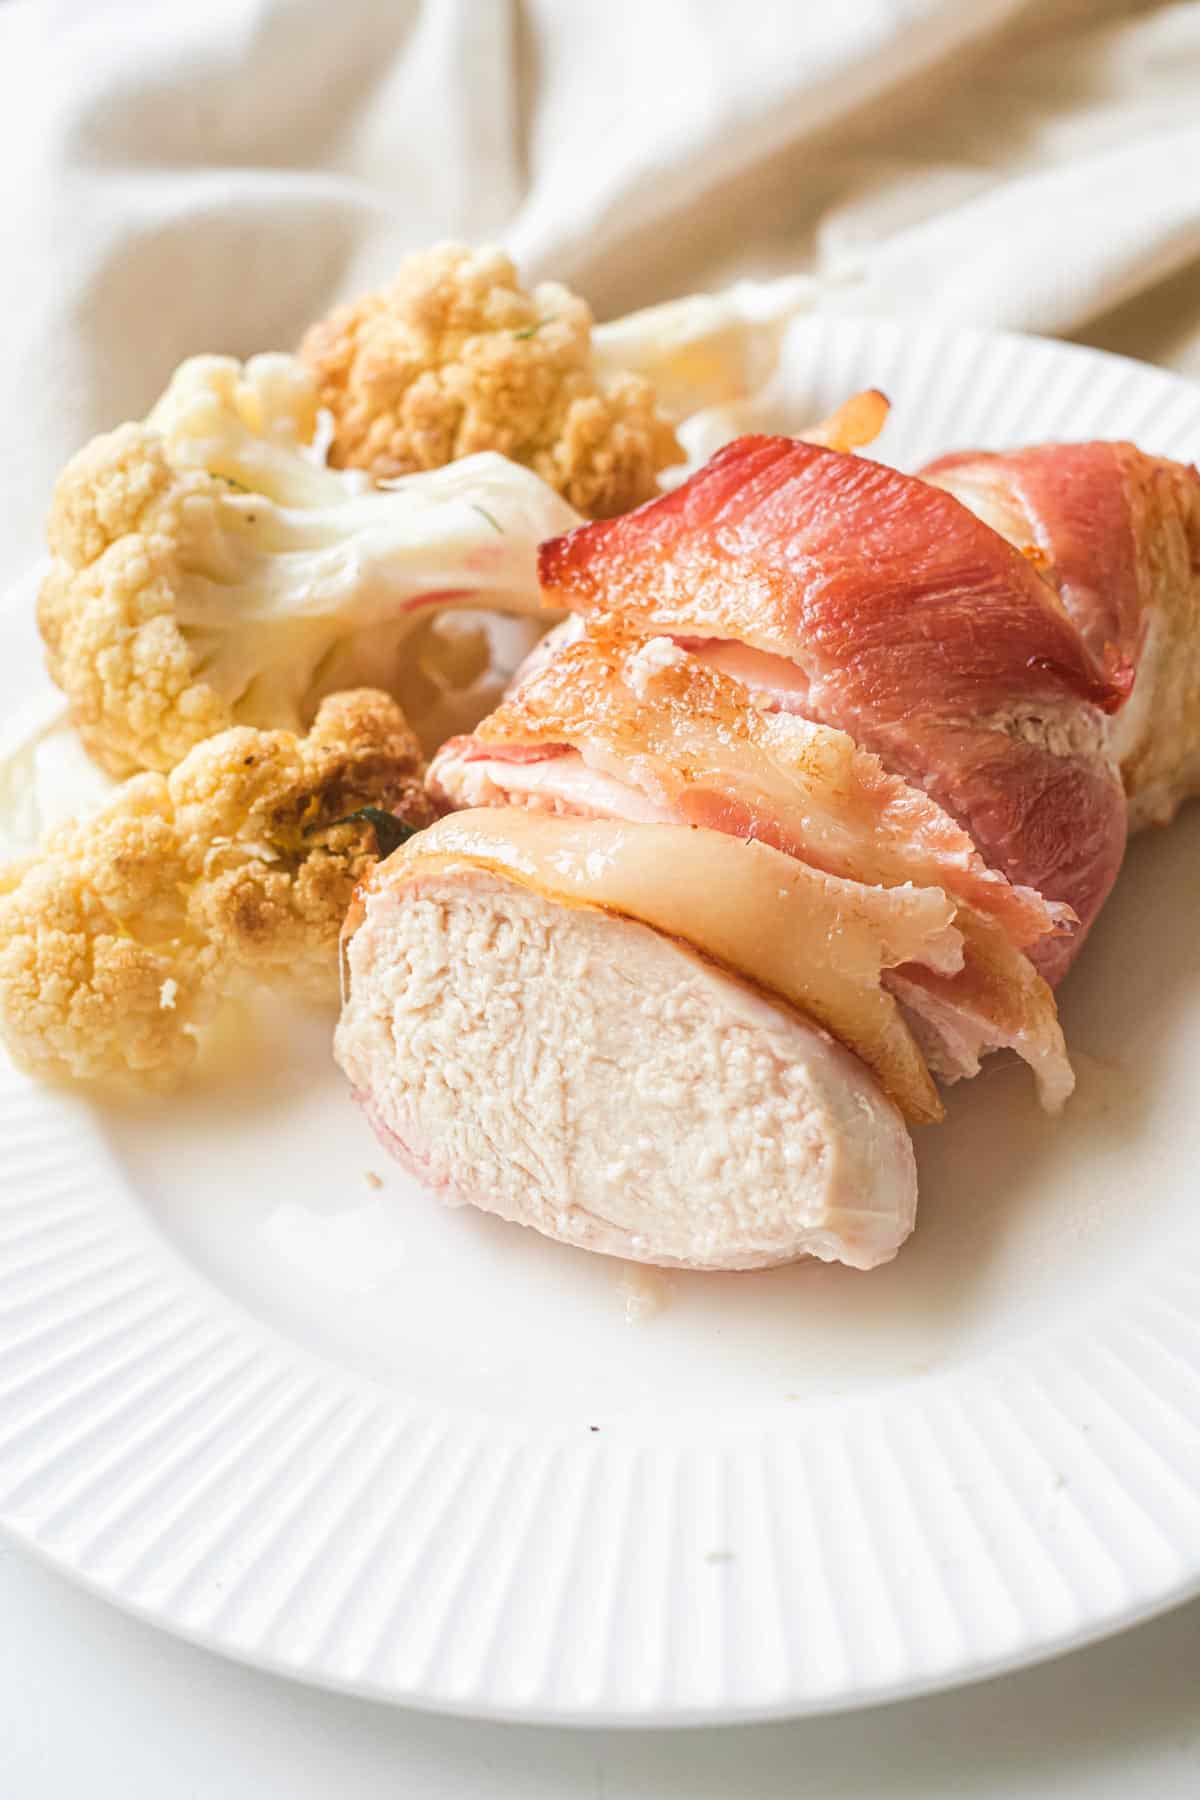 the finished air fryer bacon wrapped chicken breast served on a white dinner plate